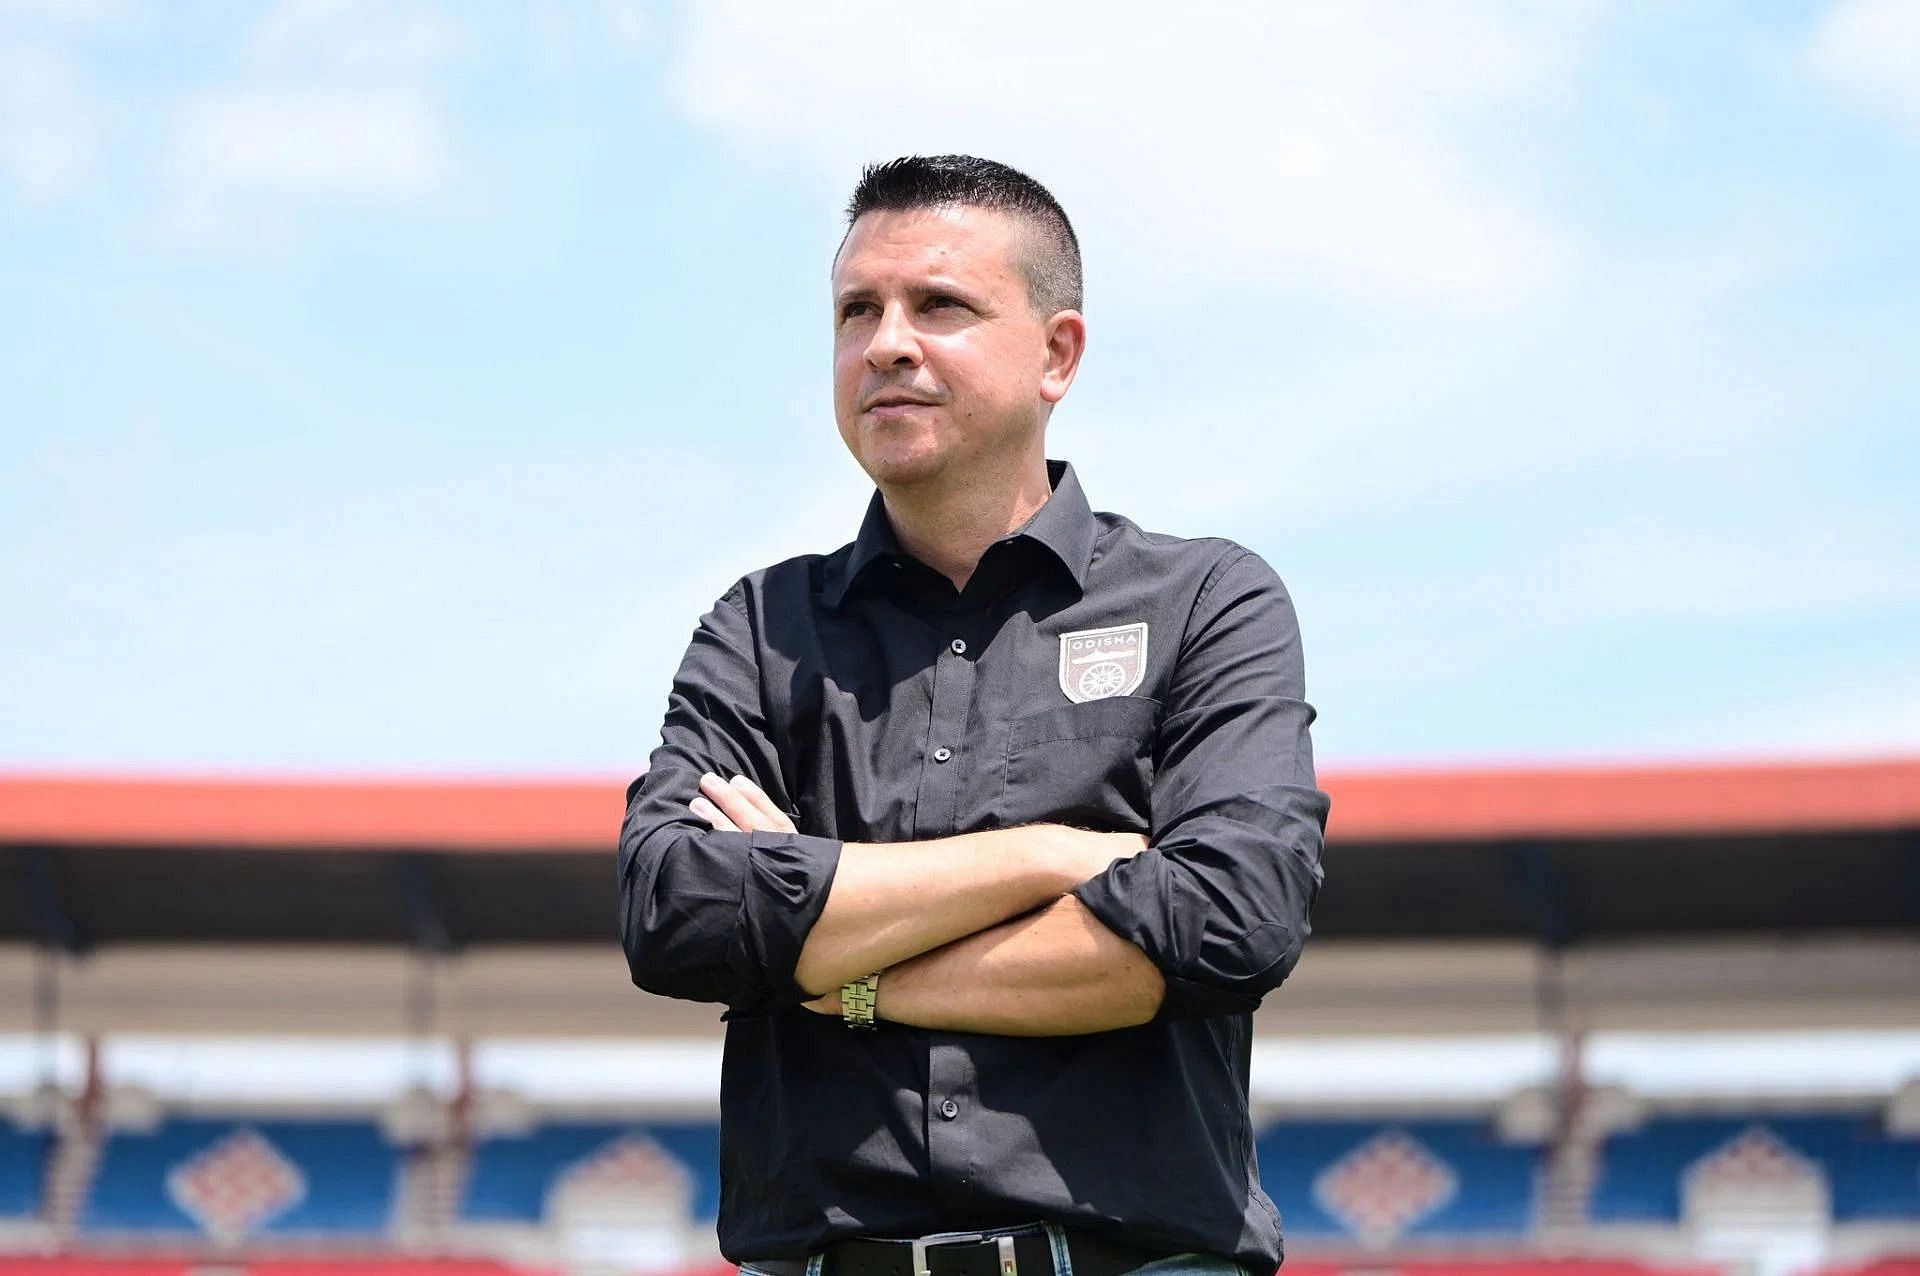 Odisha FC head coach Sergio Lobera has stated that his team is ready to give it all and fight till the very end to bring home the ISL Cup trophy this season